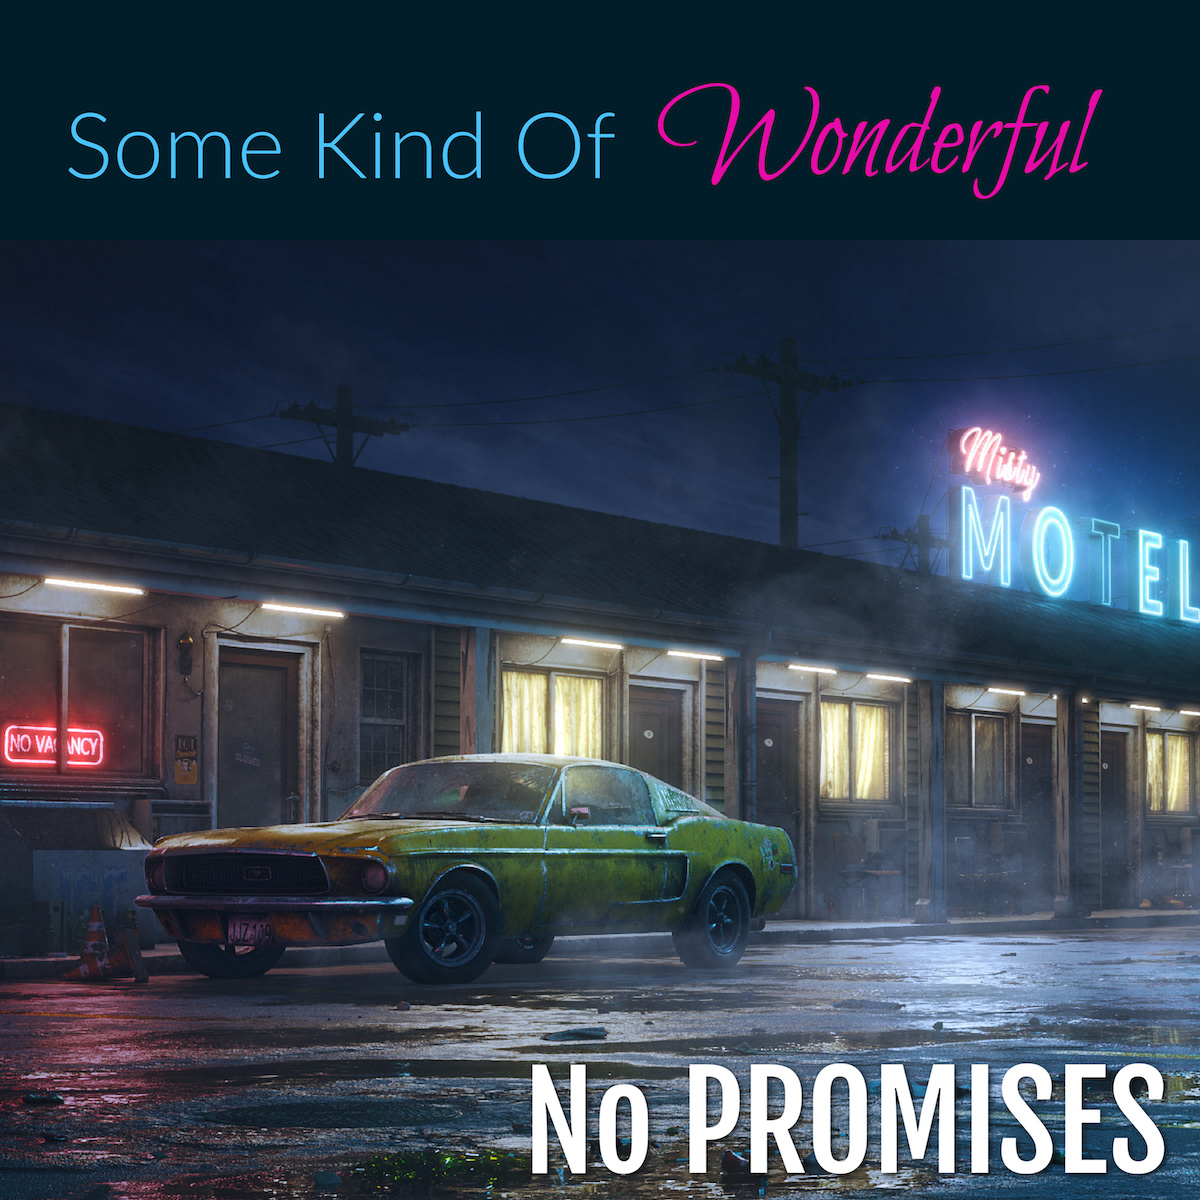 LISTEN: “Some Kind of Wonderful” by No PROMISES